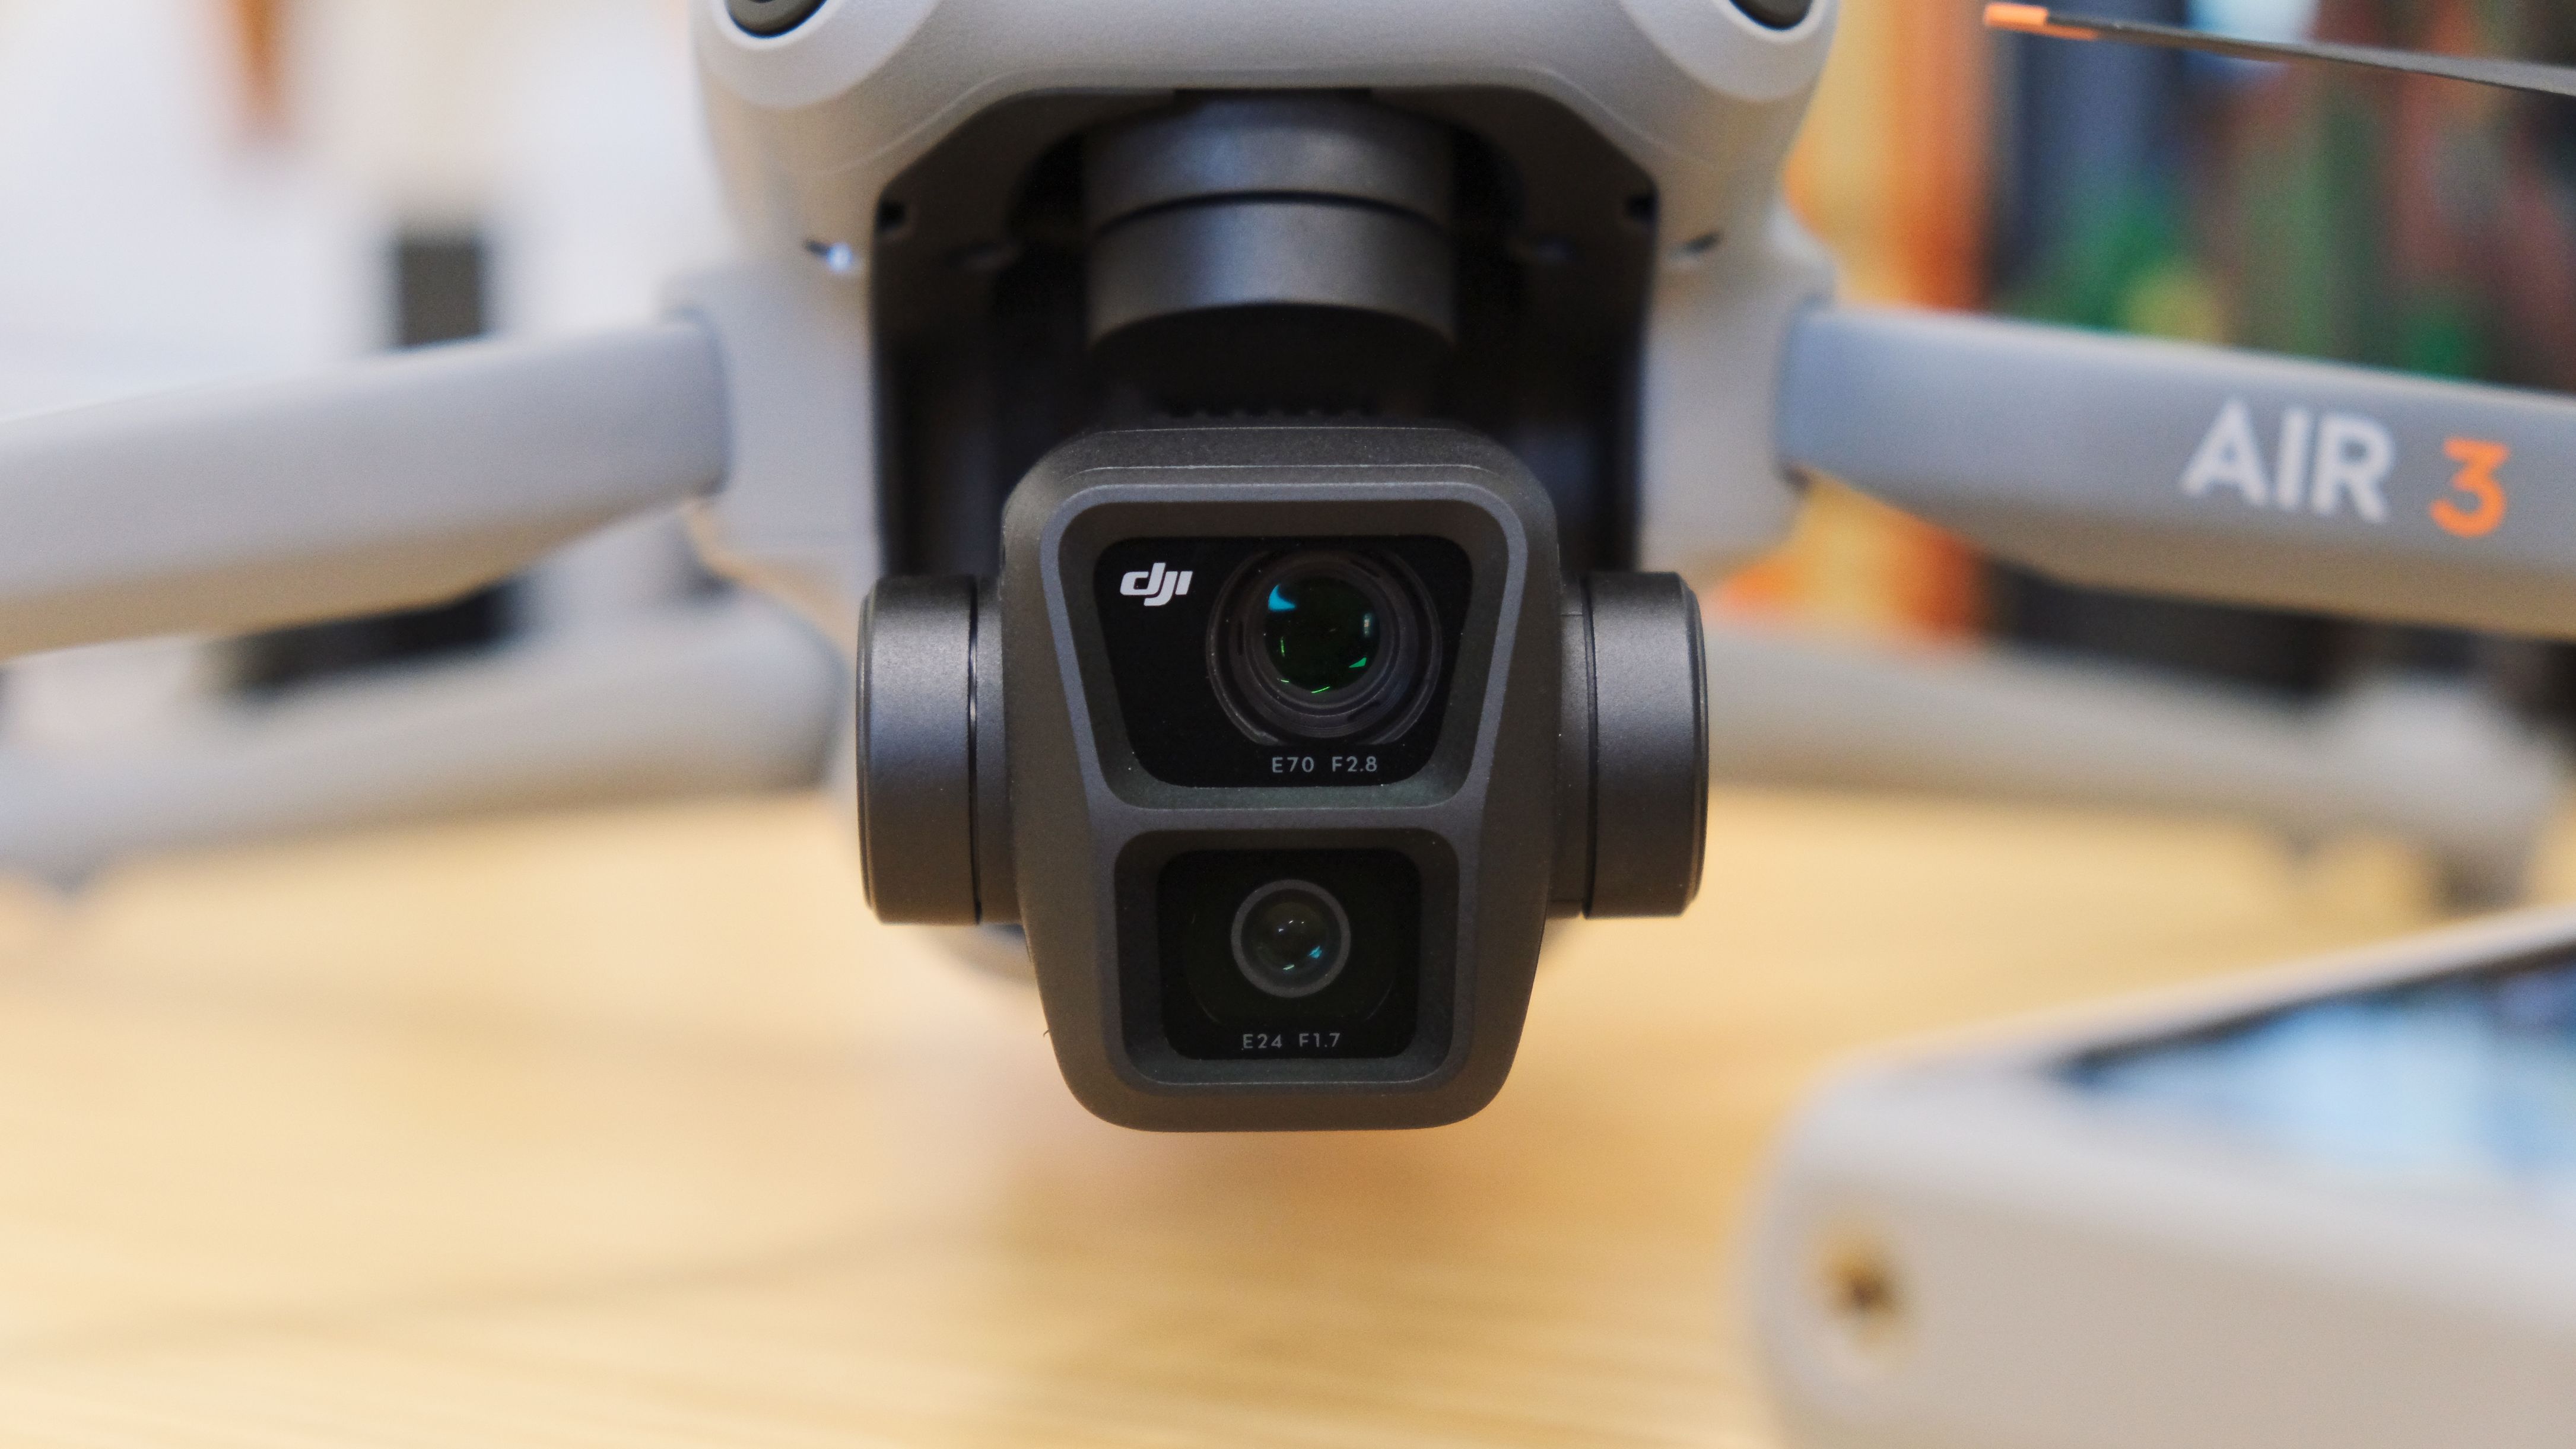 The DJI Air 3 is a $1,099 Drone with Dual Cameras and 46-Minute Battery